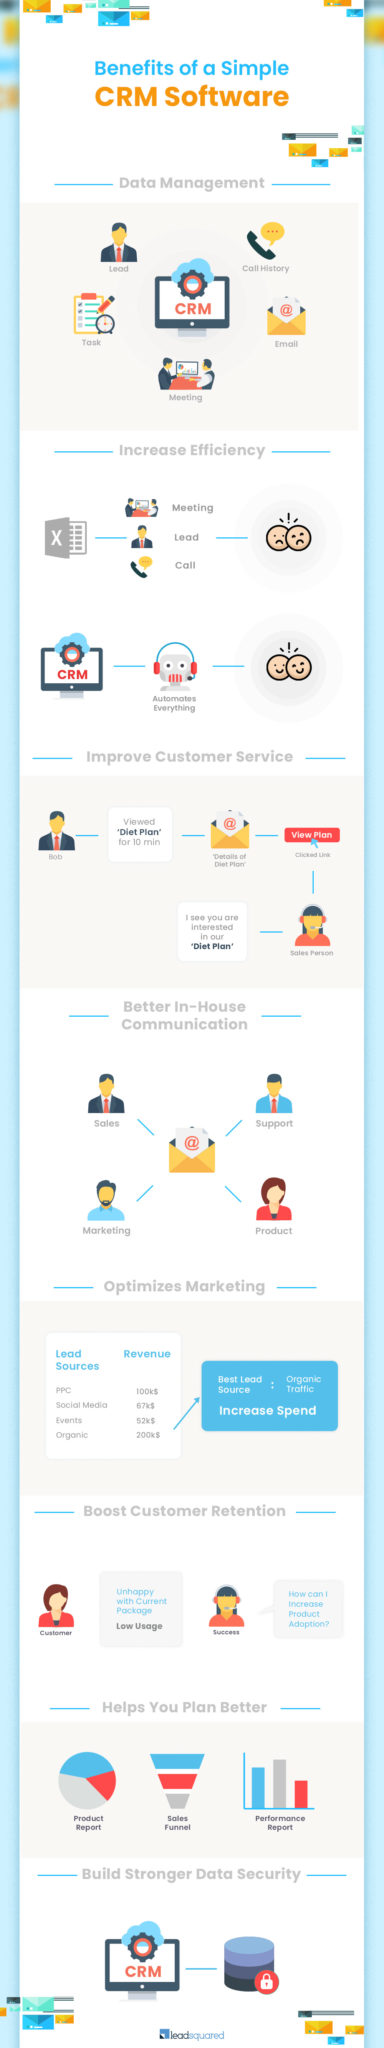 Simple CRM software - infographic